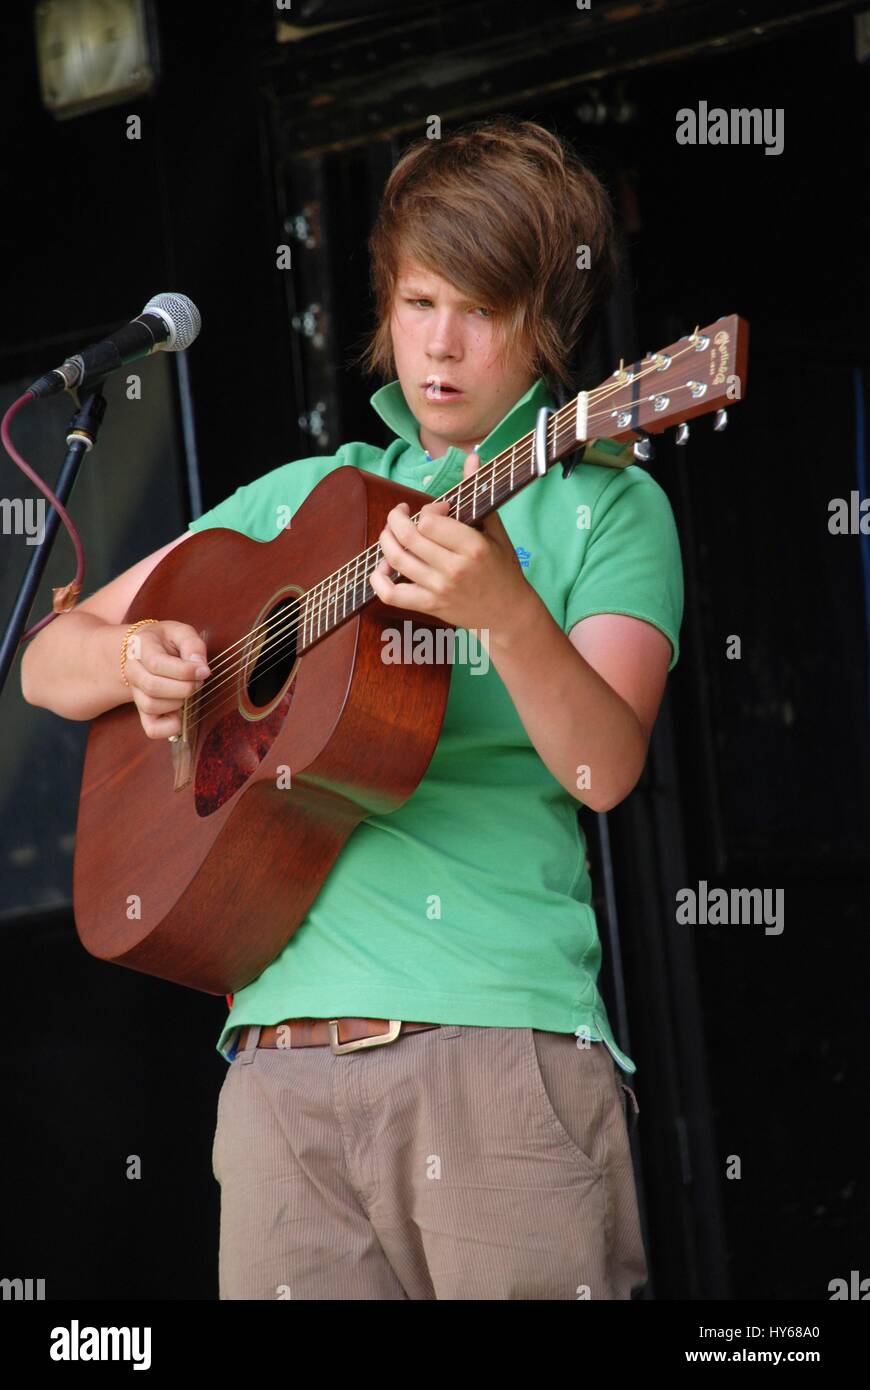 Luke Jackson, British folk and roots singer/songwriter, performs at the Tentertainment music festival at Tenterden in Kent, England on July 3, 2010. Stock Photo